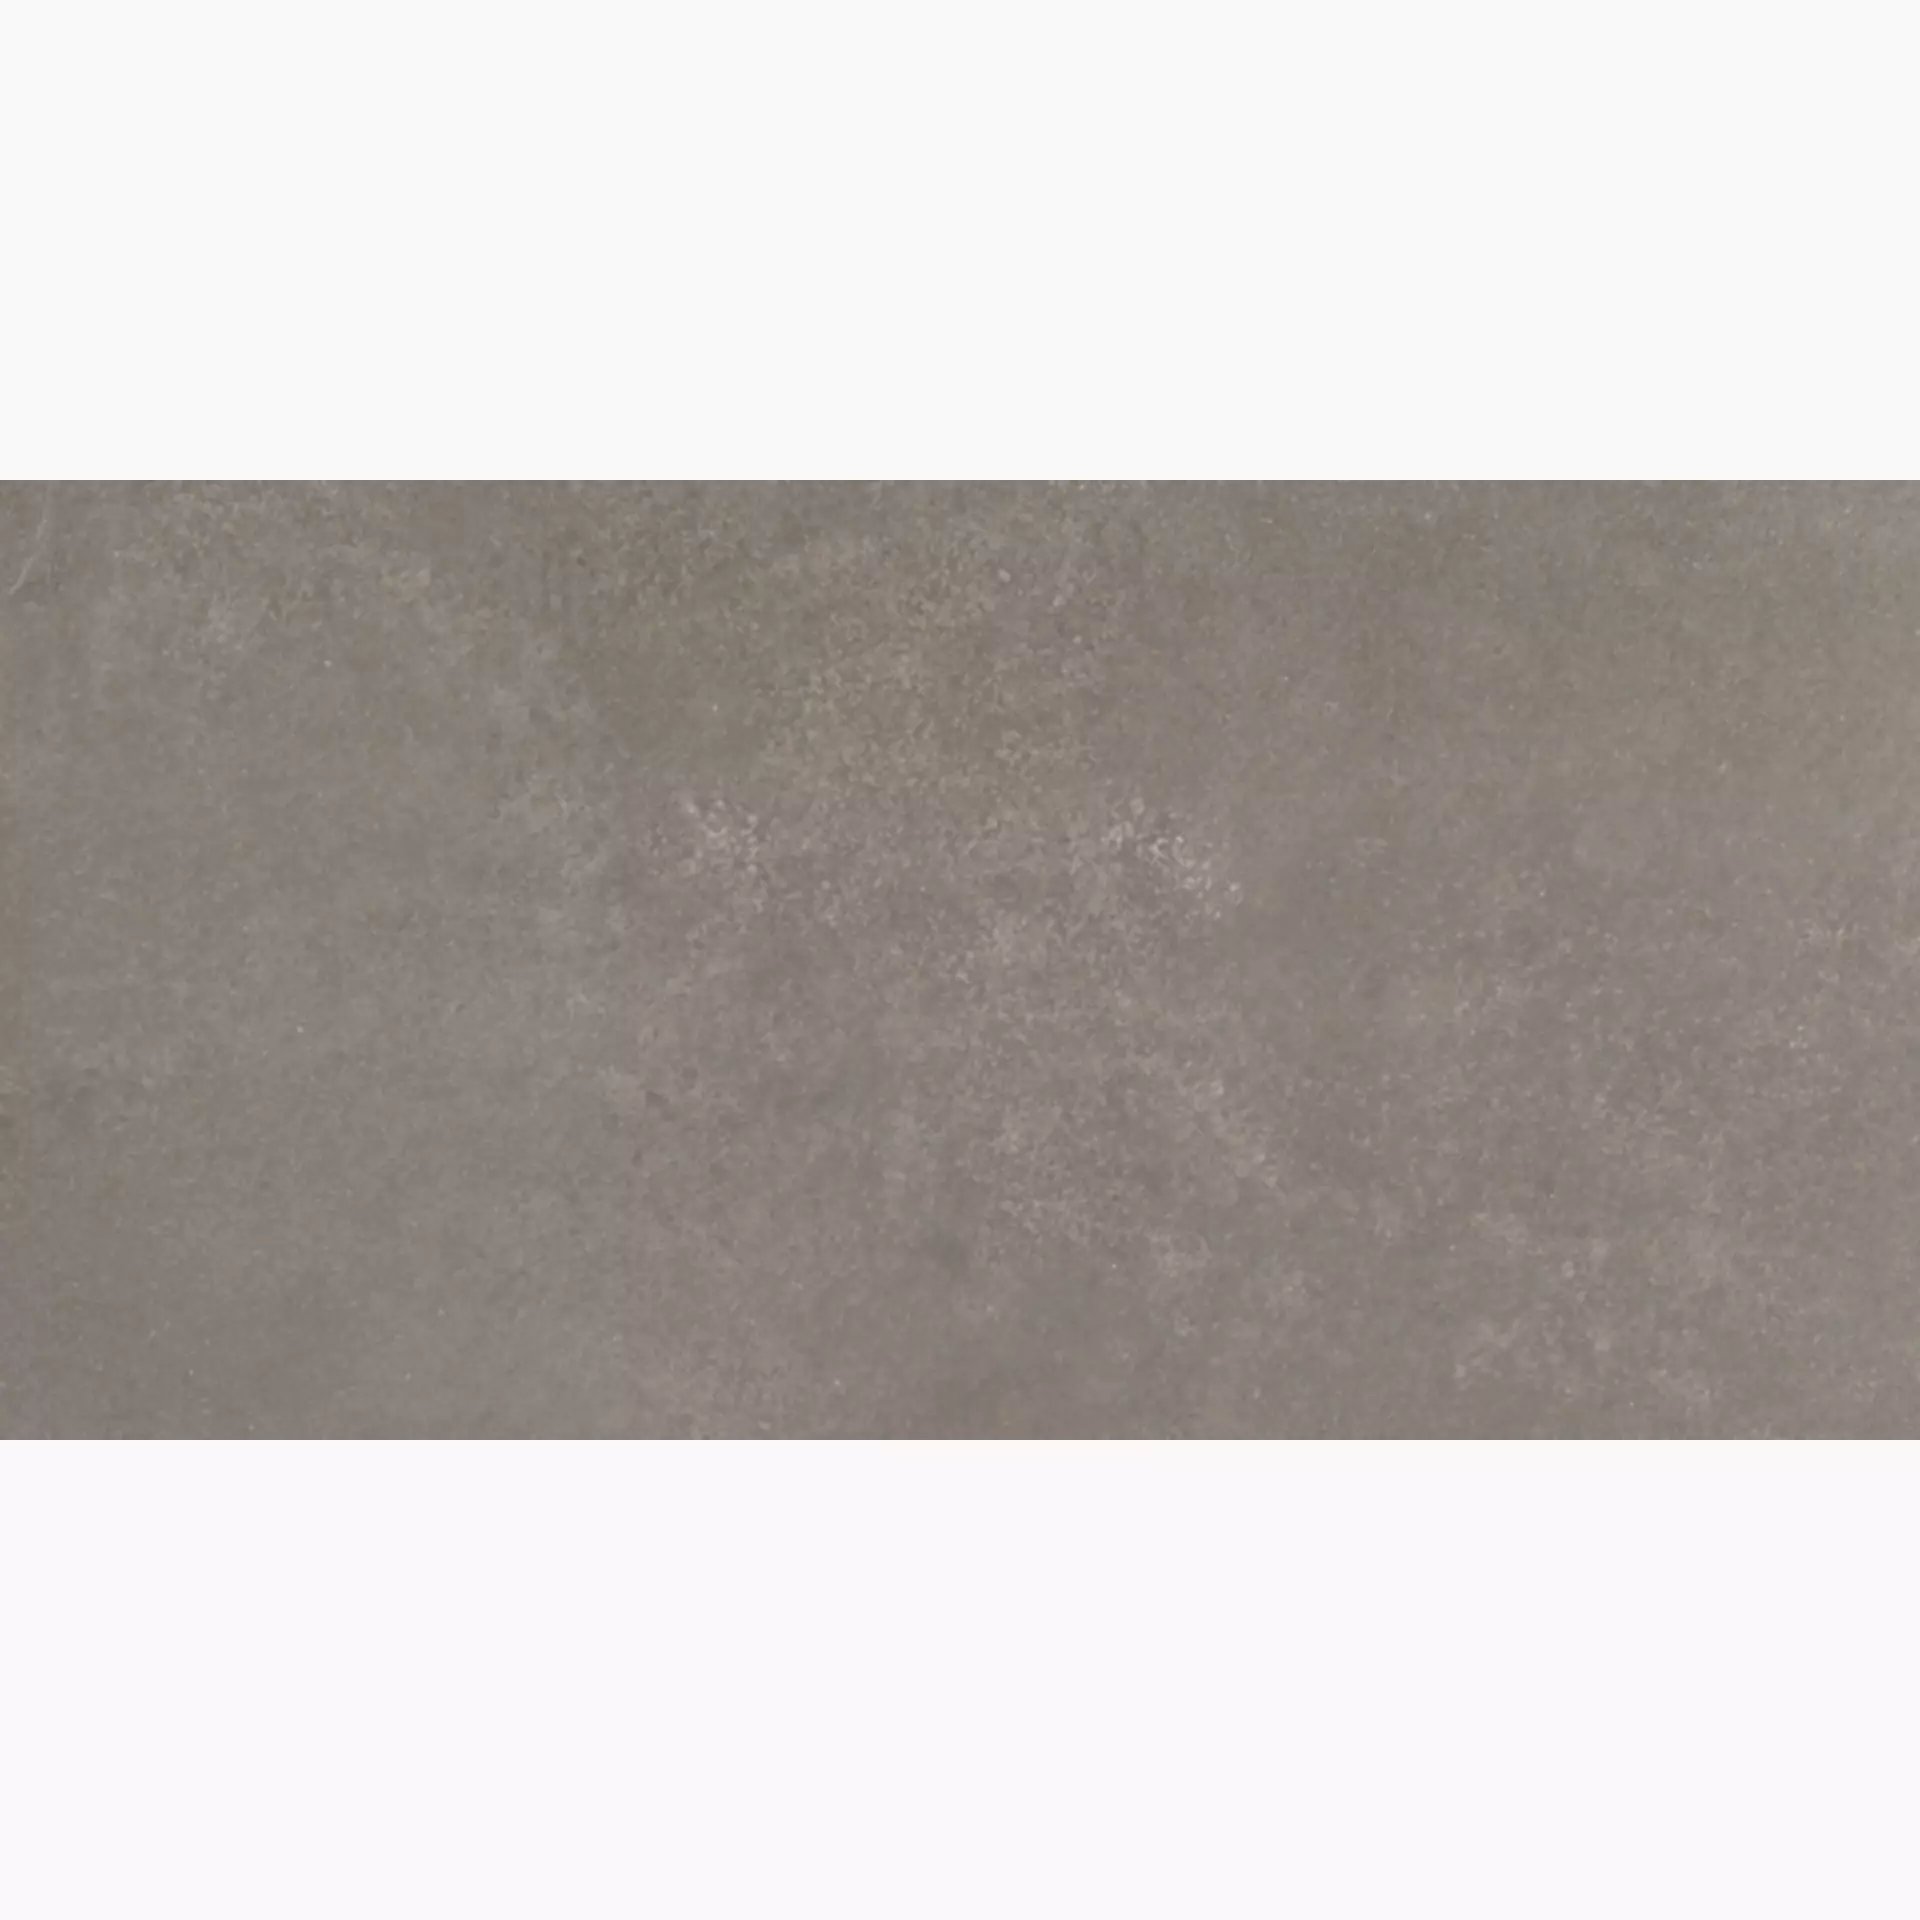 Sichenia Space Taupe 0177806 30x60cm rectified 10mm